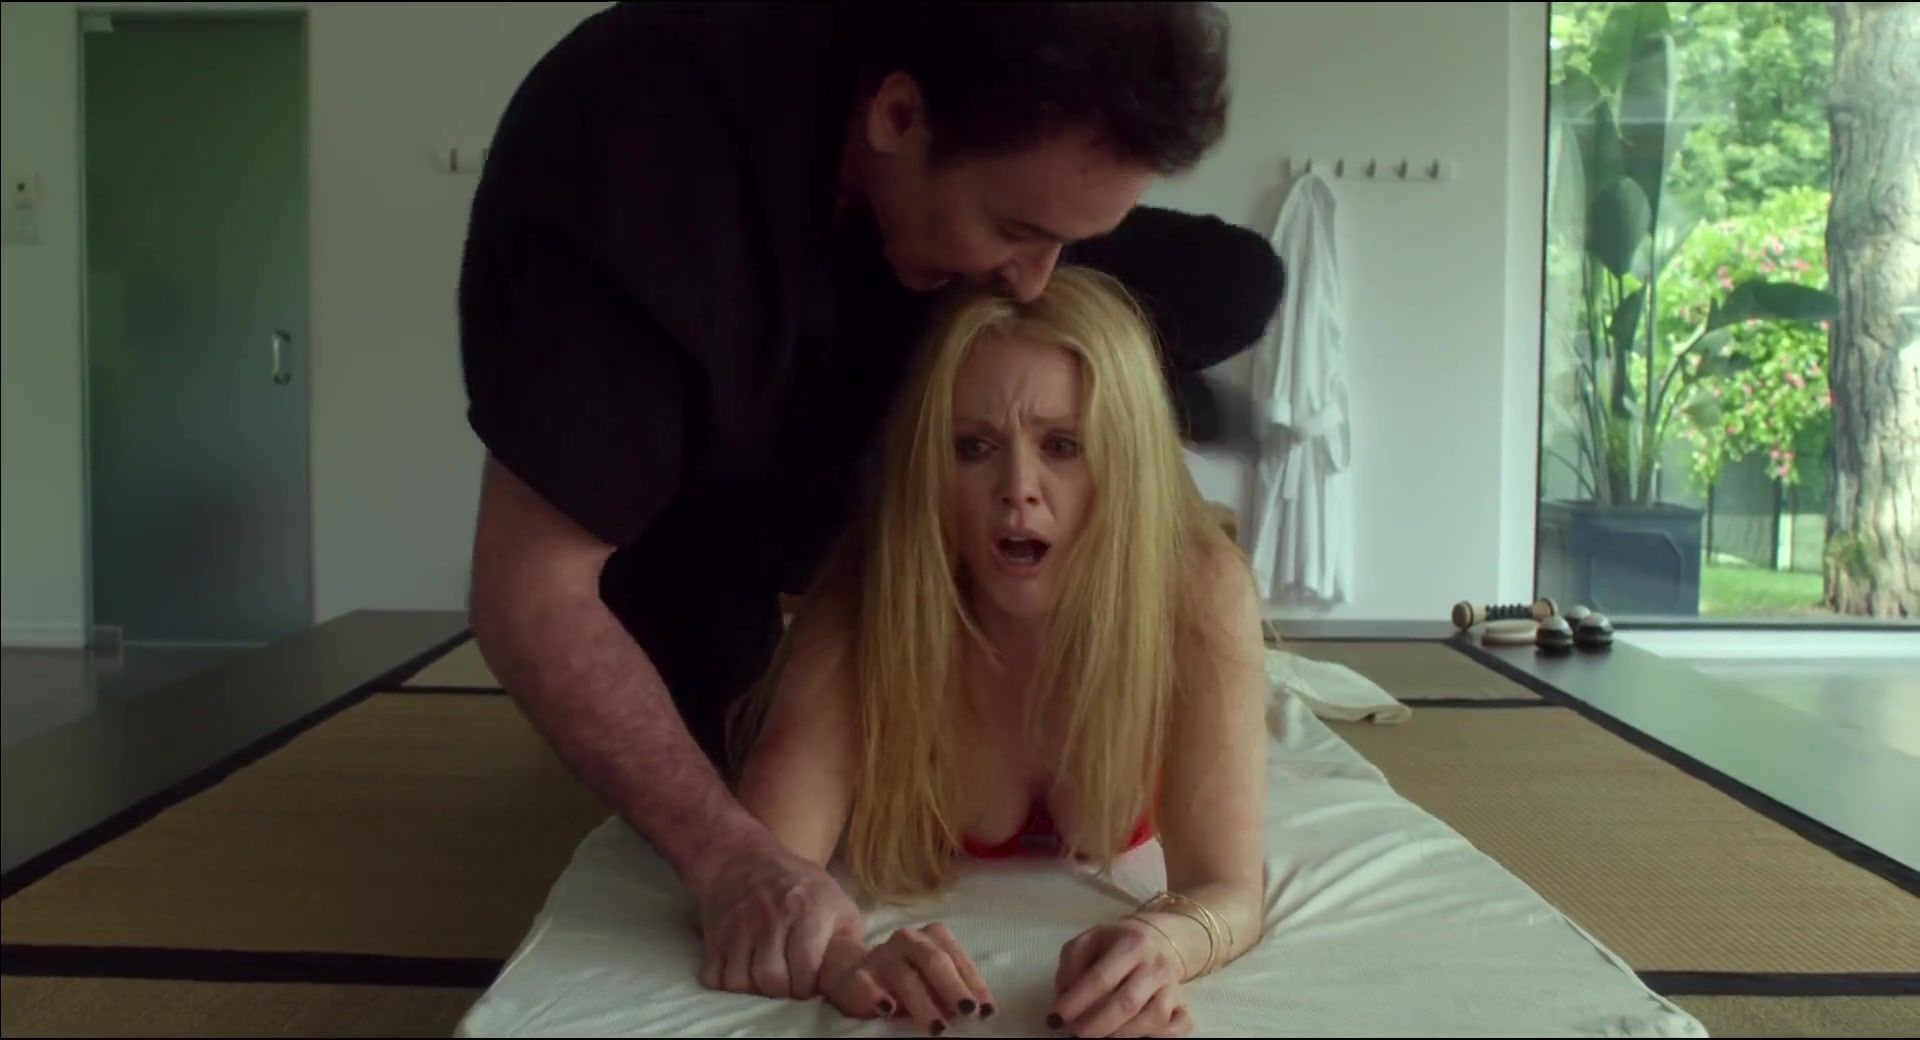 javx Submission video & Lesbian Celebs Scene | Celebrity: Julianne Moore nude | The movie "Maps to the Stars" Dildos - 1